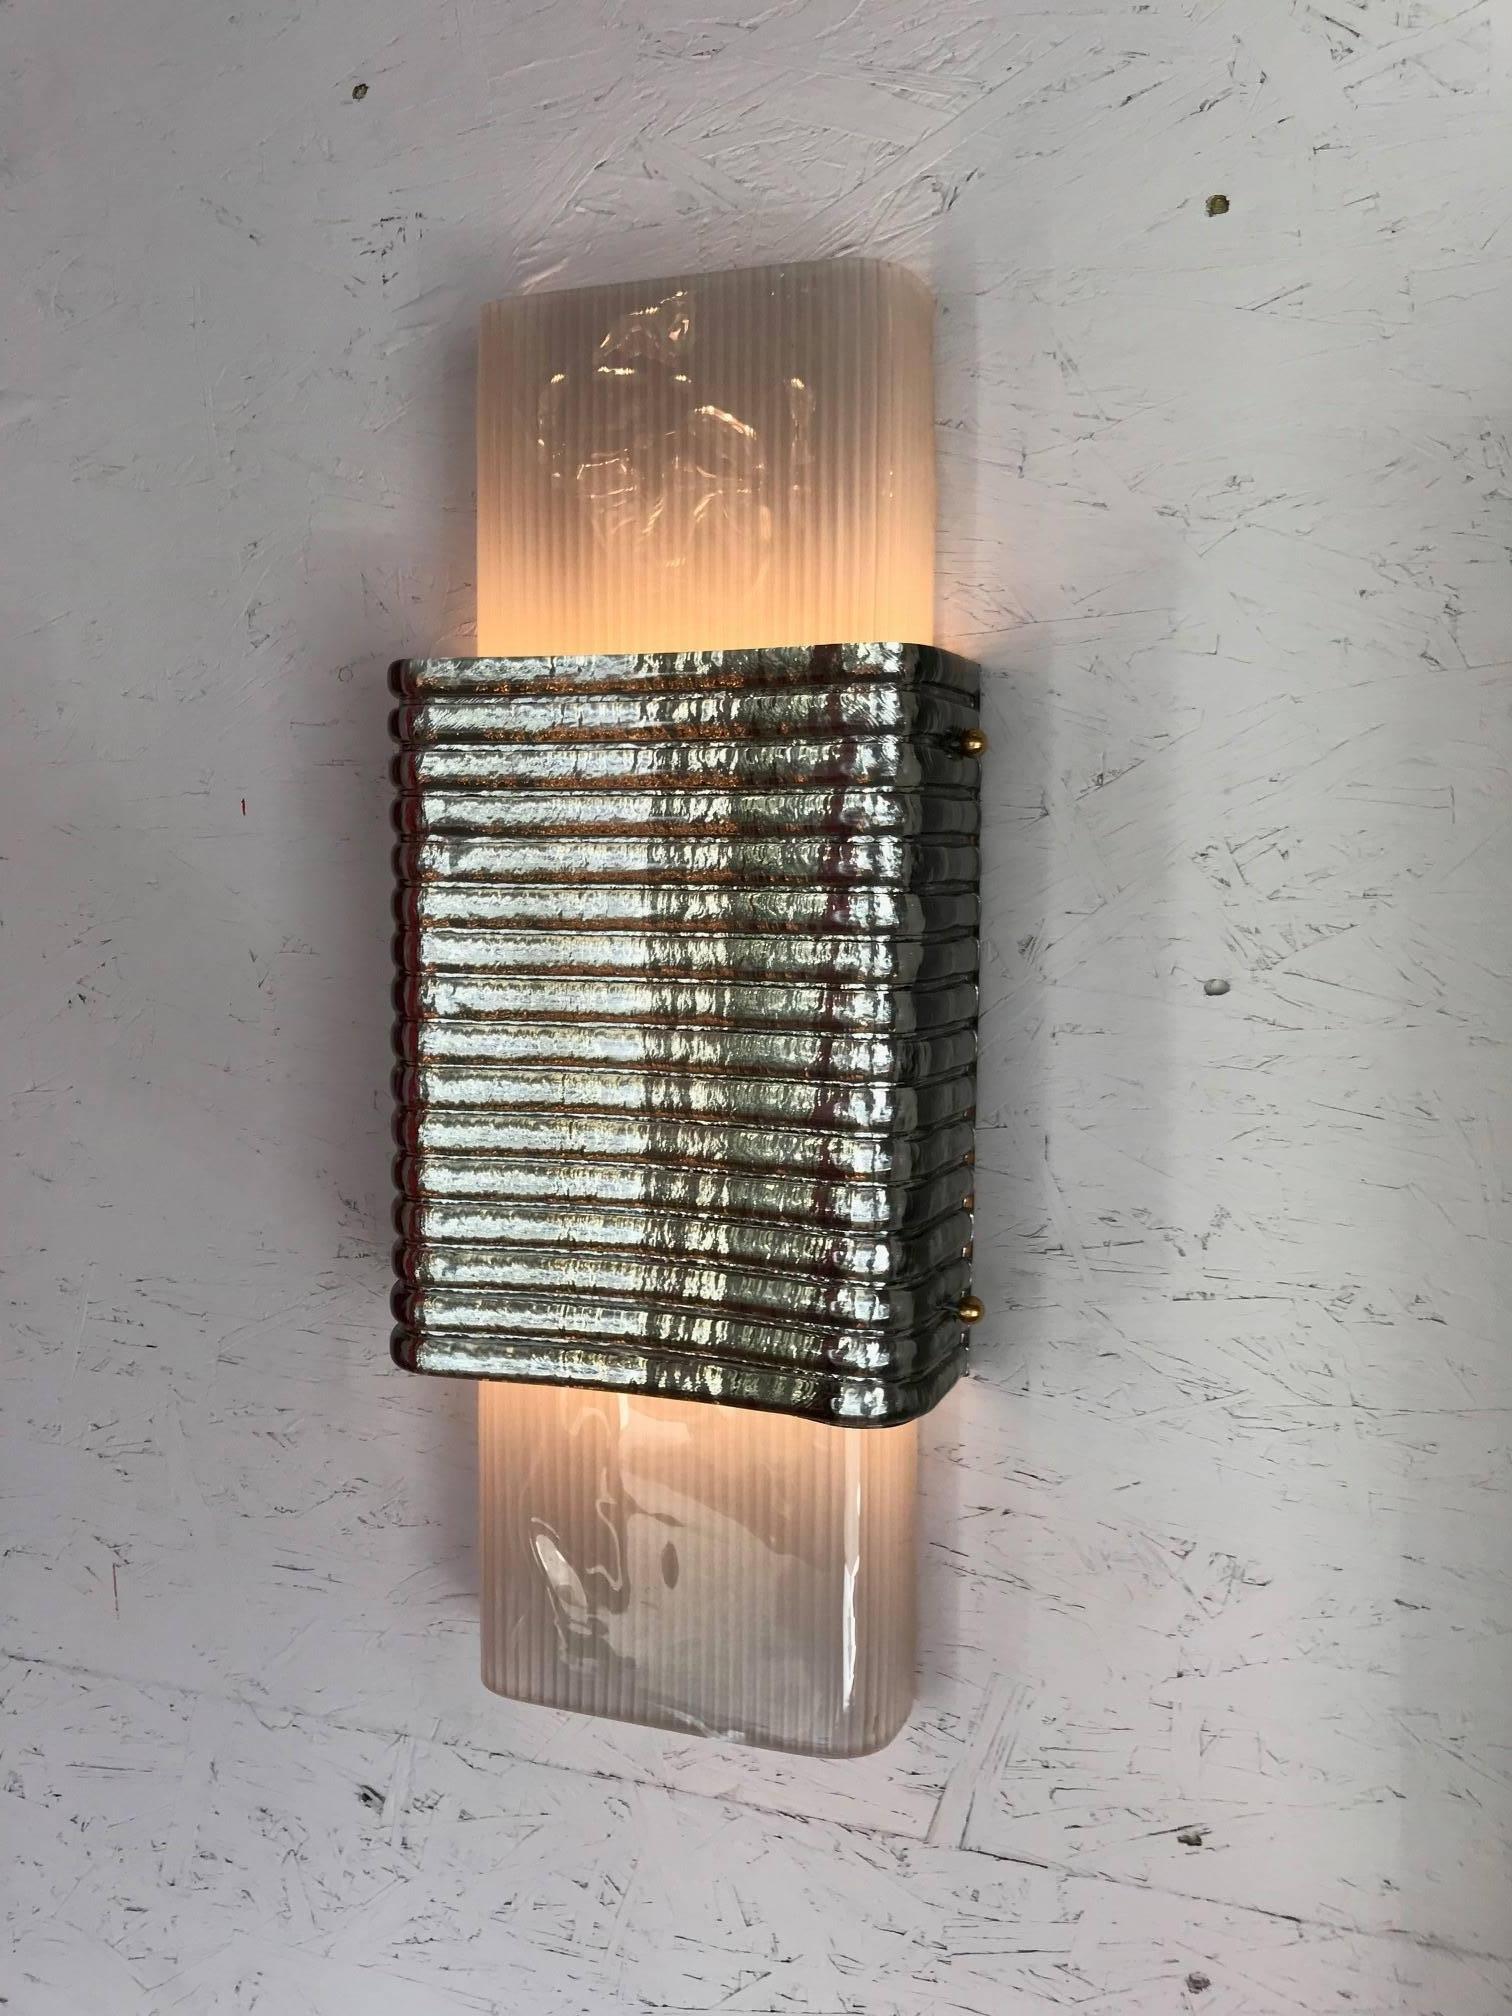 Italian Murano wall light or flush mount with frosted ribbed and silvered textured glass panels, designed by Fabio Bergomi for Fabio Ltd / Made in Italy
4 lights / E12 or E14 type / max 40W each
Measures: Depth 4 inches, width 10 inches, height 24